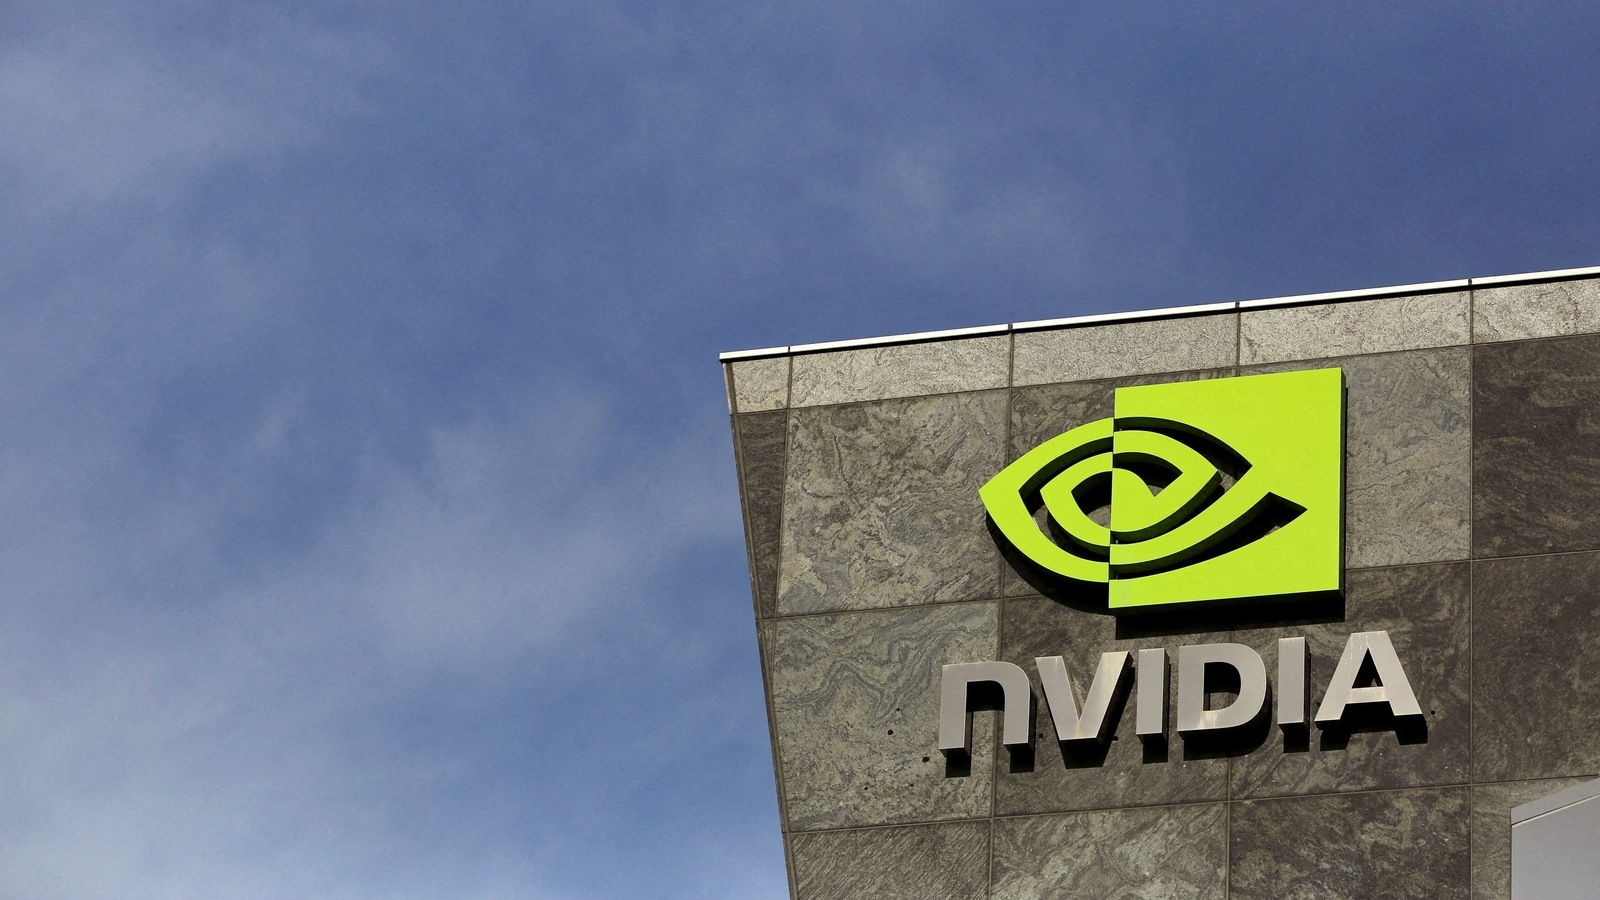 US Restricts Nvidia Made-for-China Chips in New Sale Rules